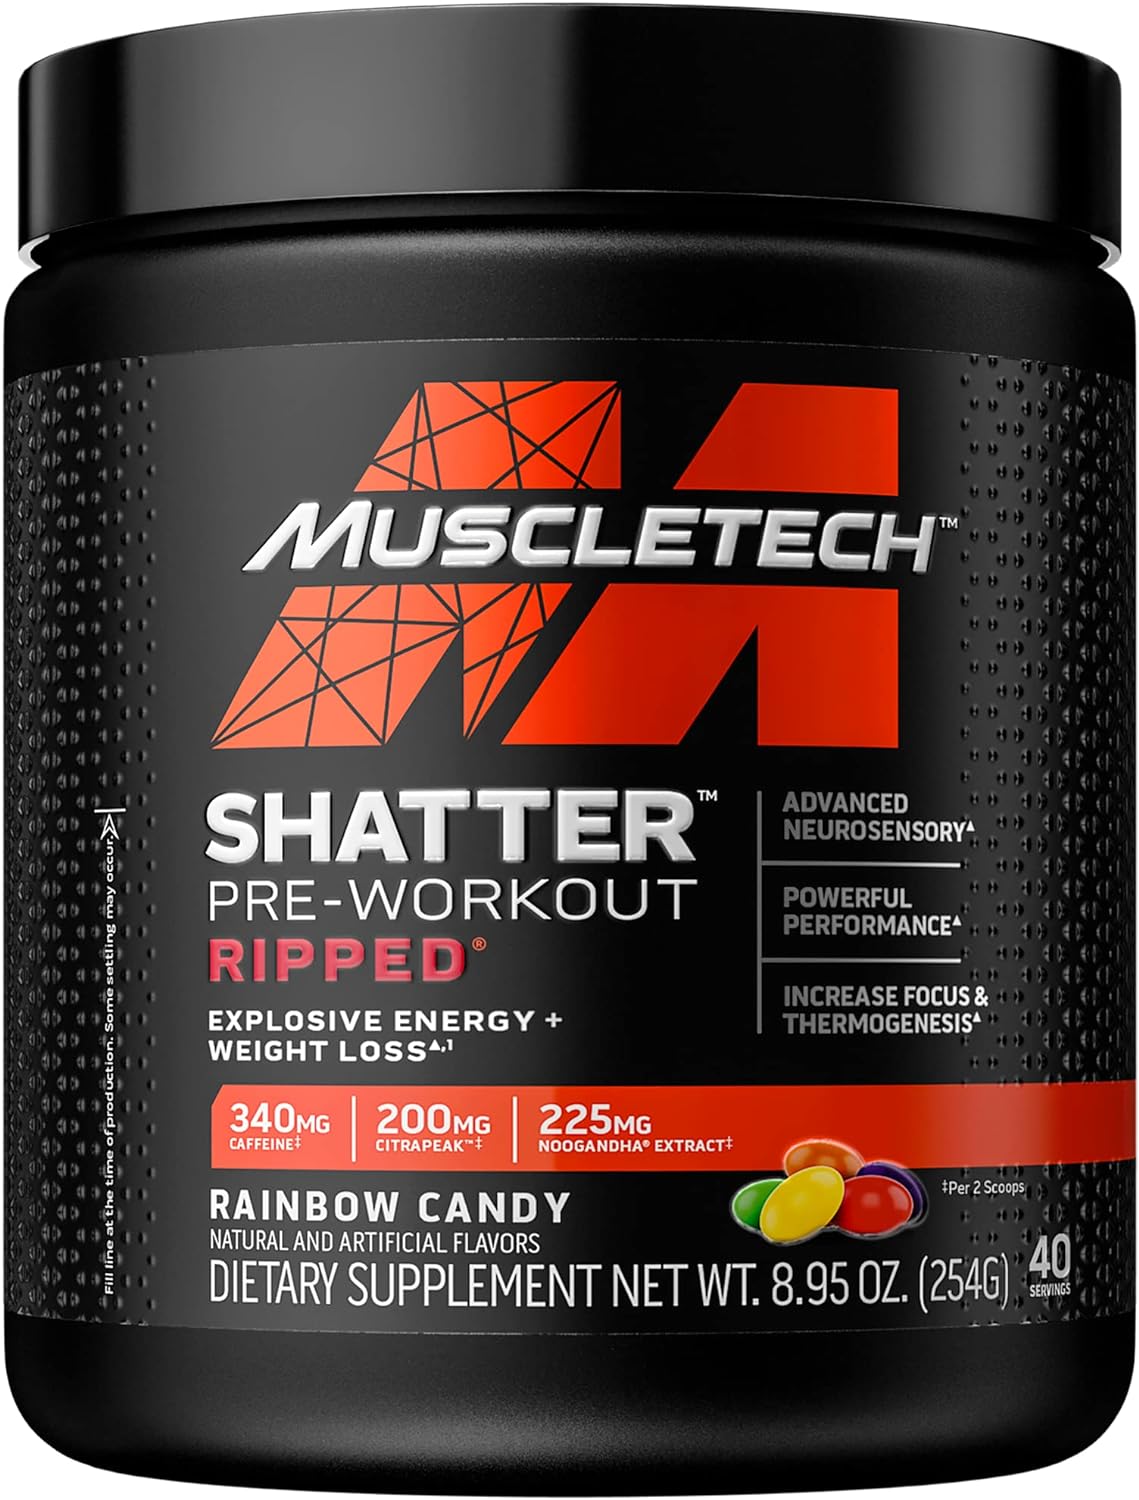 Pre Workout + Weight Loss MuscleTech Shatter Ripped Pre-Workout Pre Wo